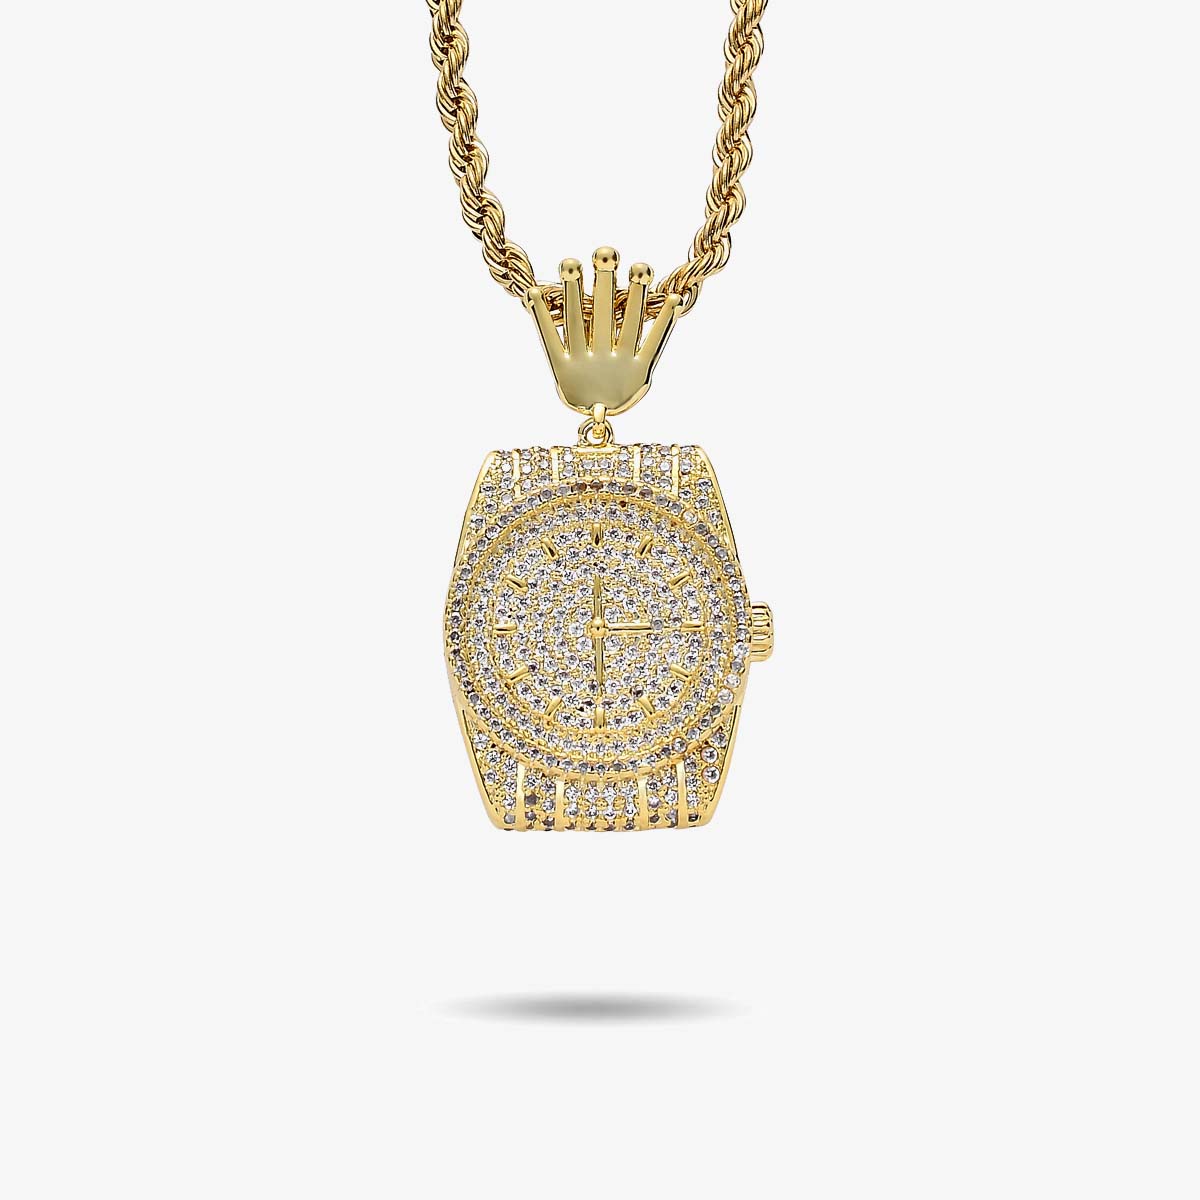 Iced "Don't envy my gold watch“ Pendant